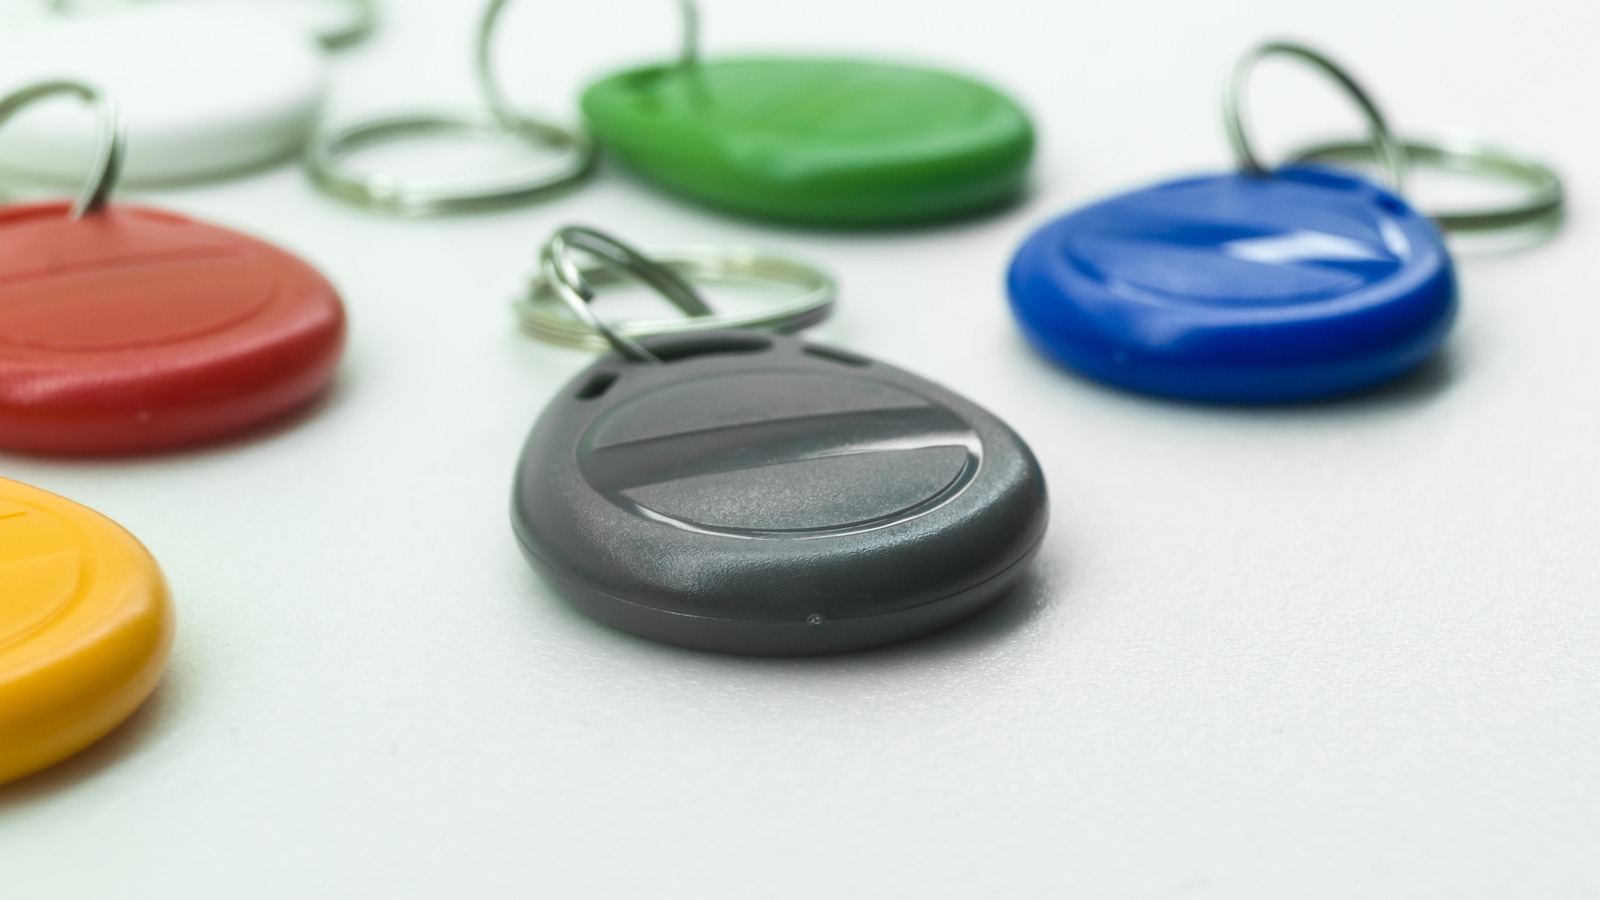 22 Cool Uses for NFC Tags You Didn't Know - TechWiser